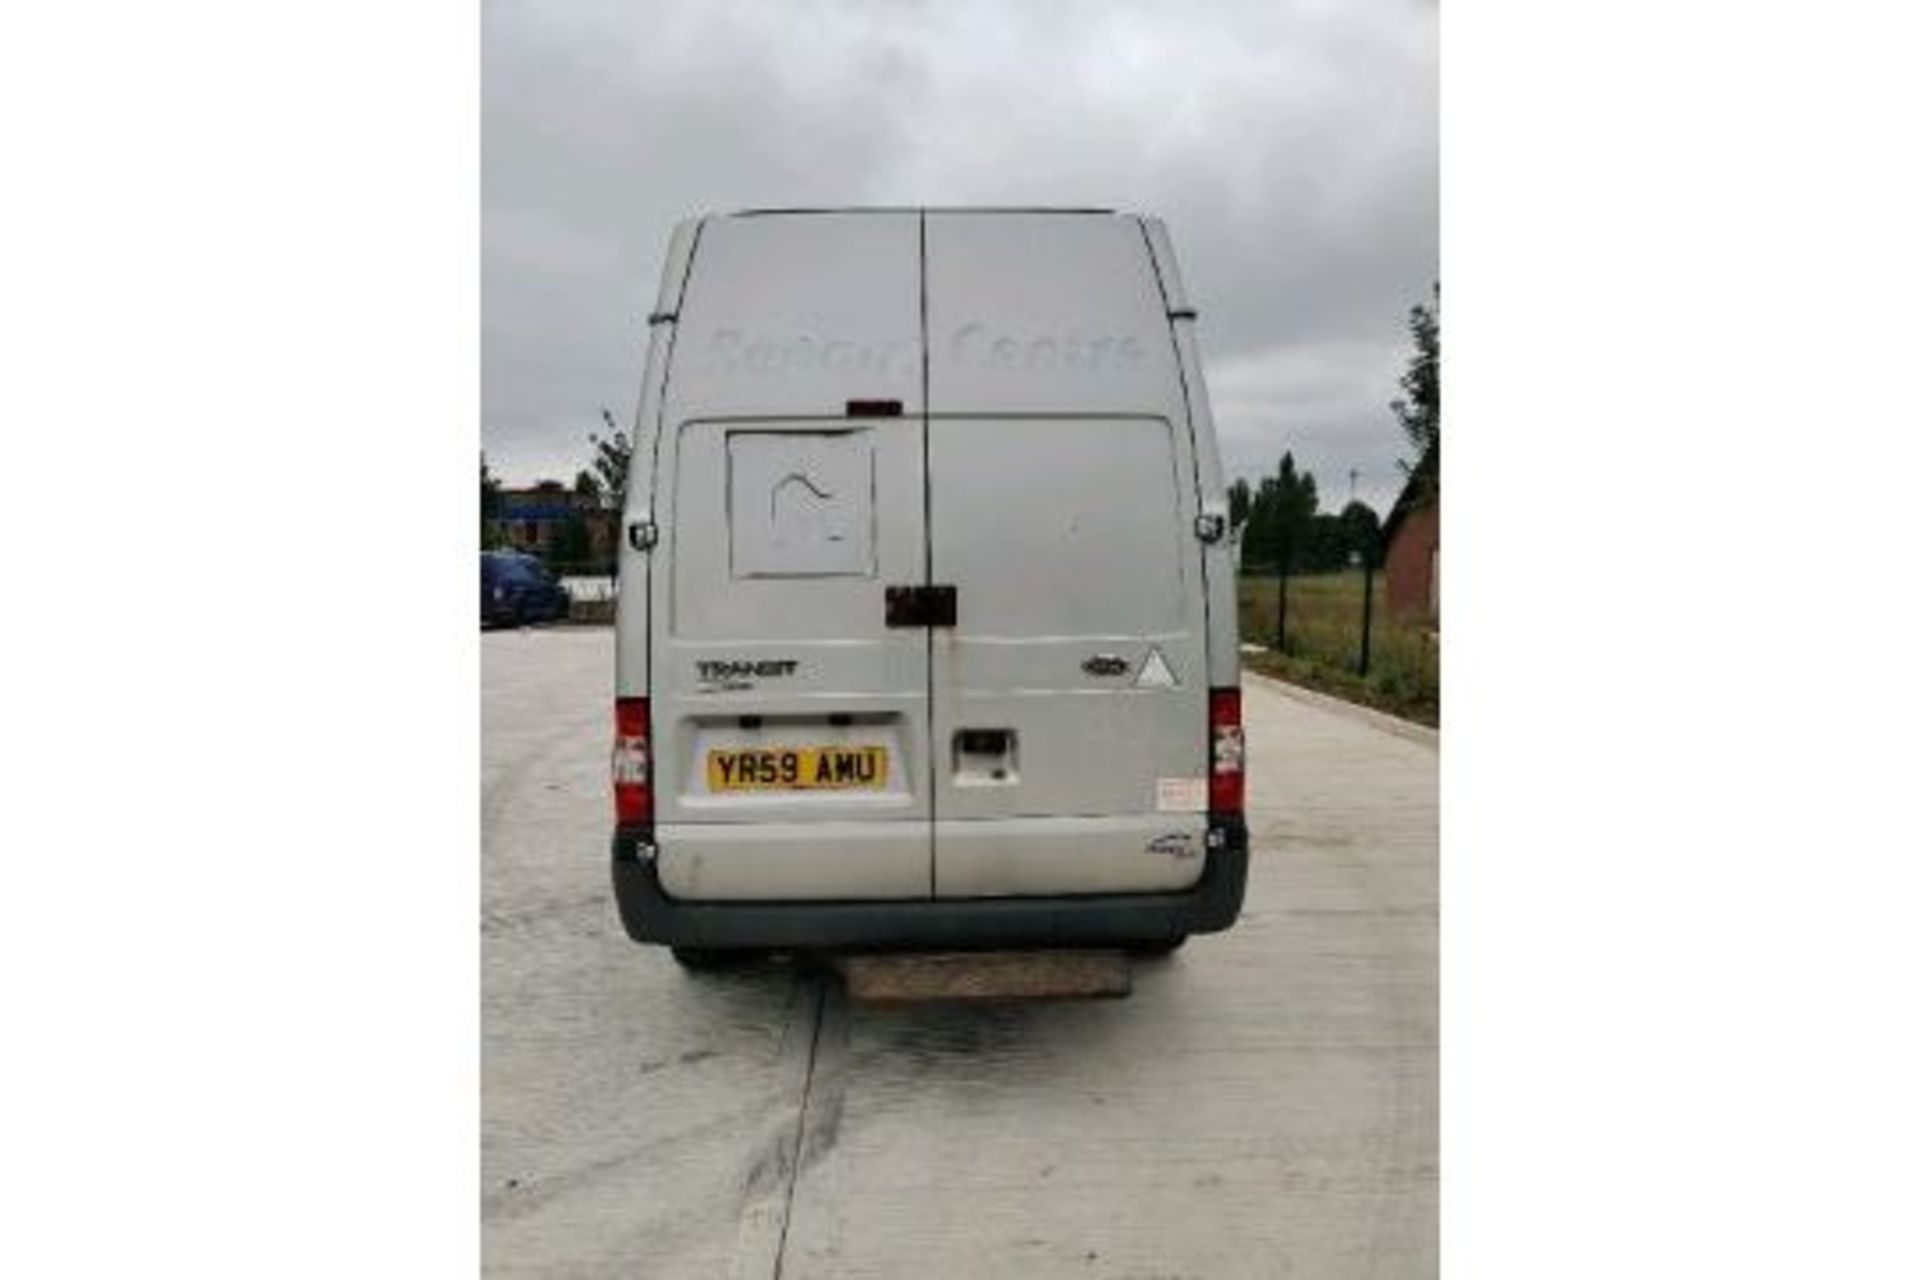 ENTRY DIRECT FROM LOCAL AUTHORITY Ford Transit 115 T350M FWD, Reg: YR59AMU - Image 4 of 29